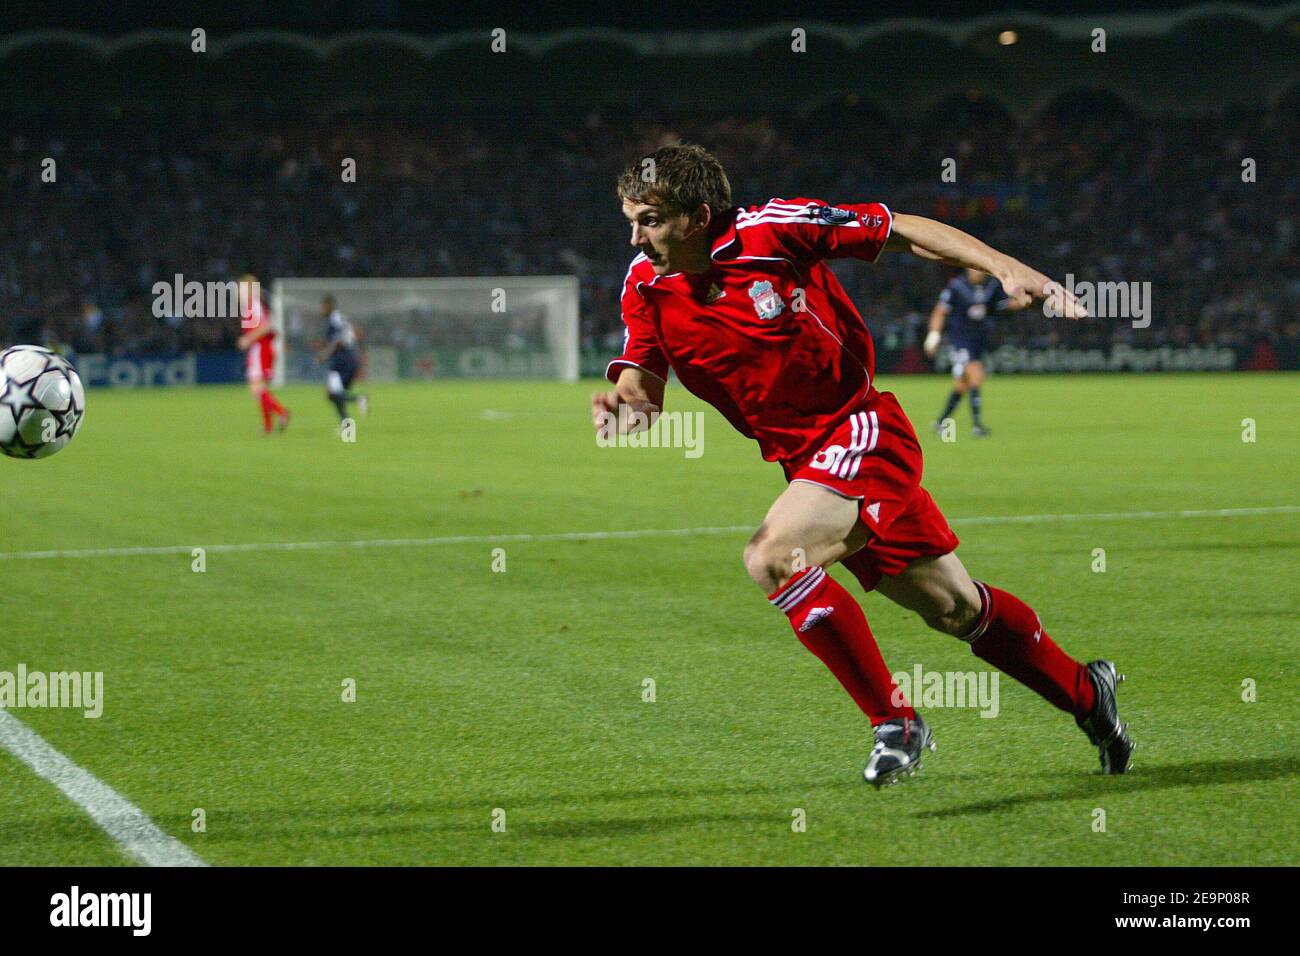 Liverpool's Stephen Warnock during the Champions League group C match, FC Girondins De Bordeaux vs Liverpool FC, at Chaban-Delmas Stadium in Bordeaux, France, on October 18, 2006. Liverpool won 1-0. Photo by Manuel Blondeau/Cameleon/ABACAPRESS.COM Stock Photo